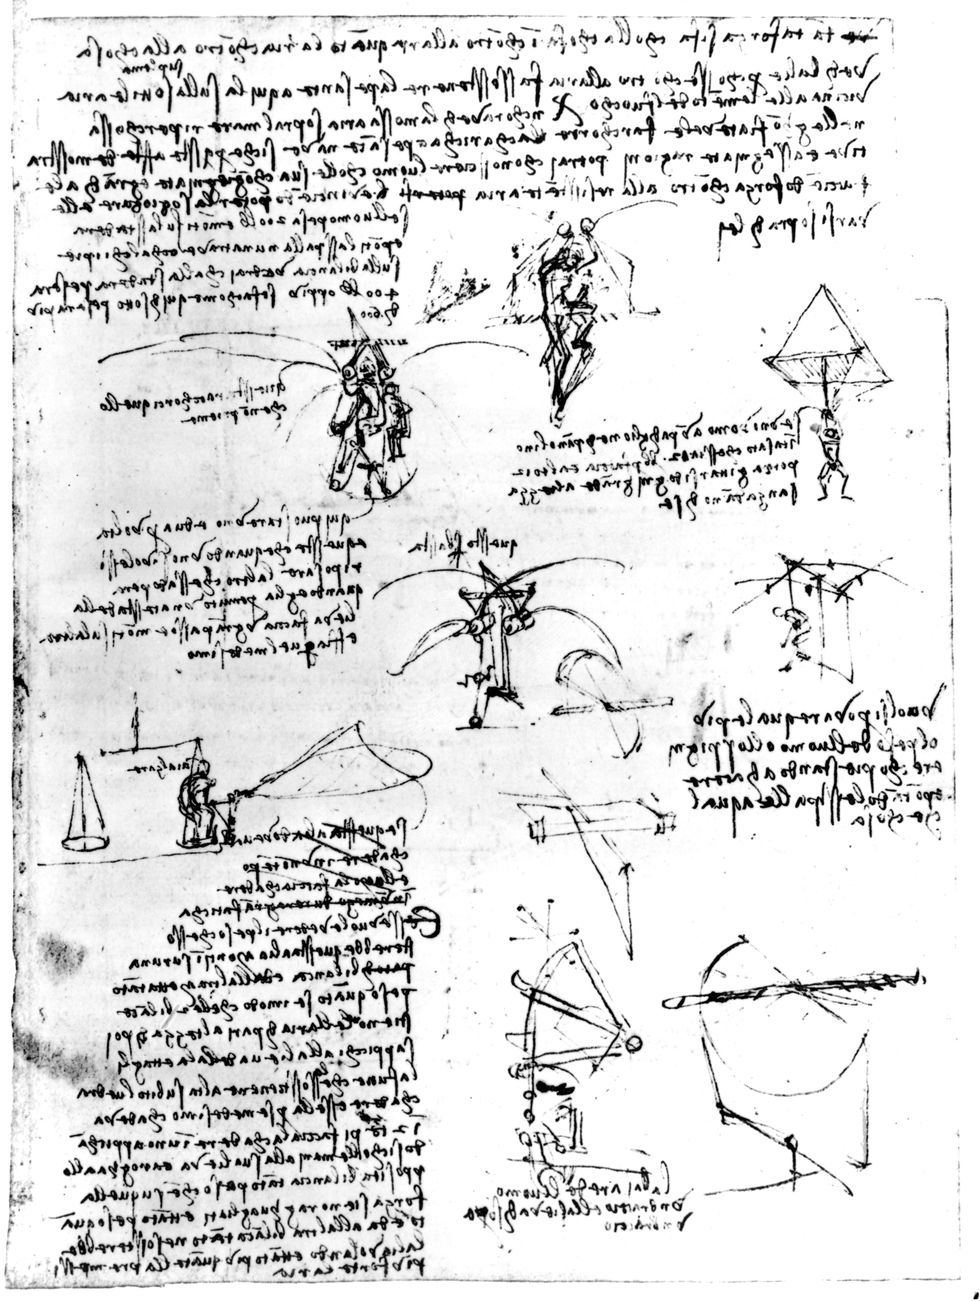 Parachute experiments on flying machine wings, 15th century.